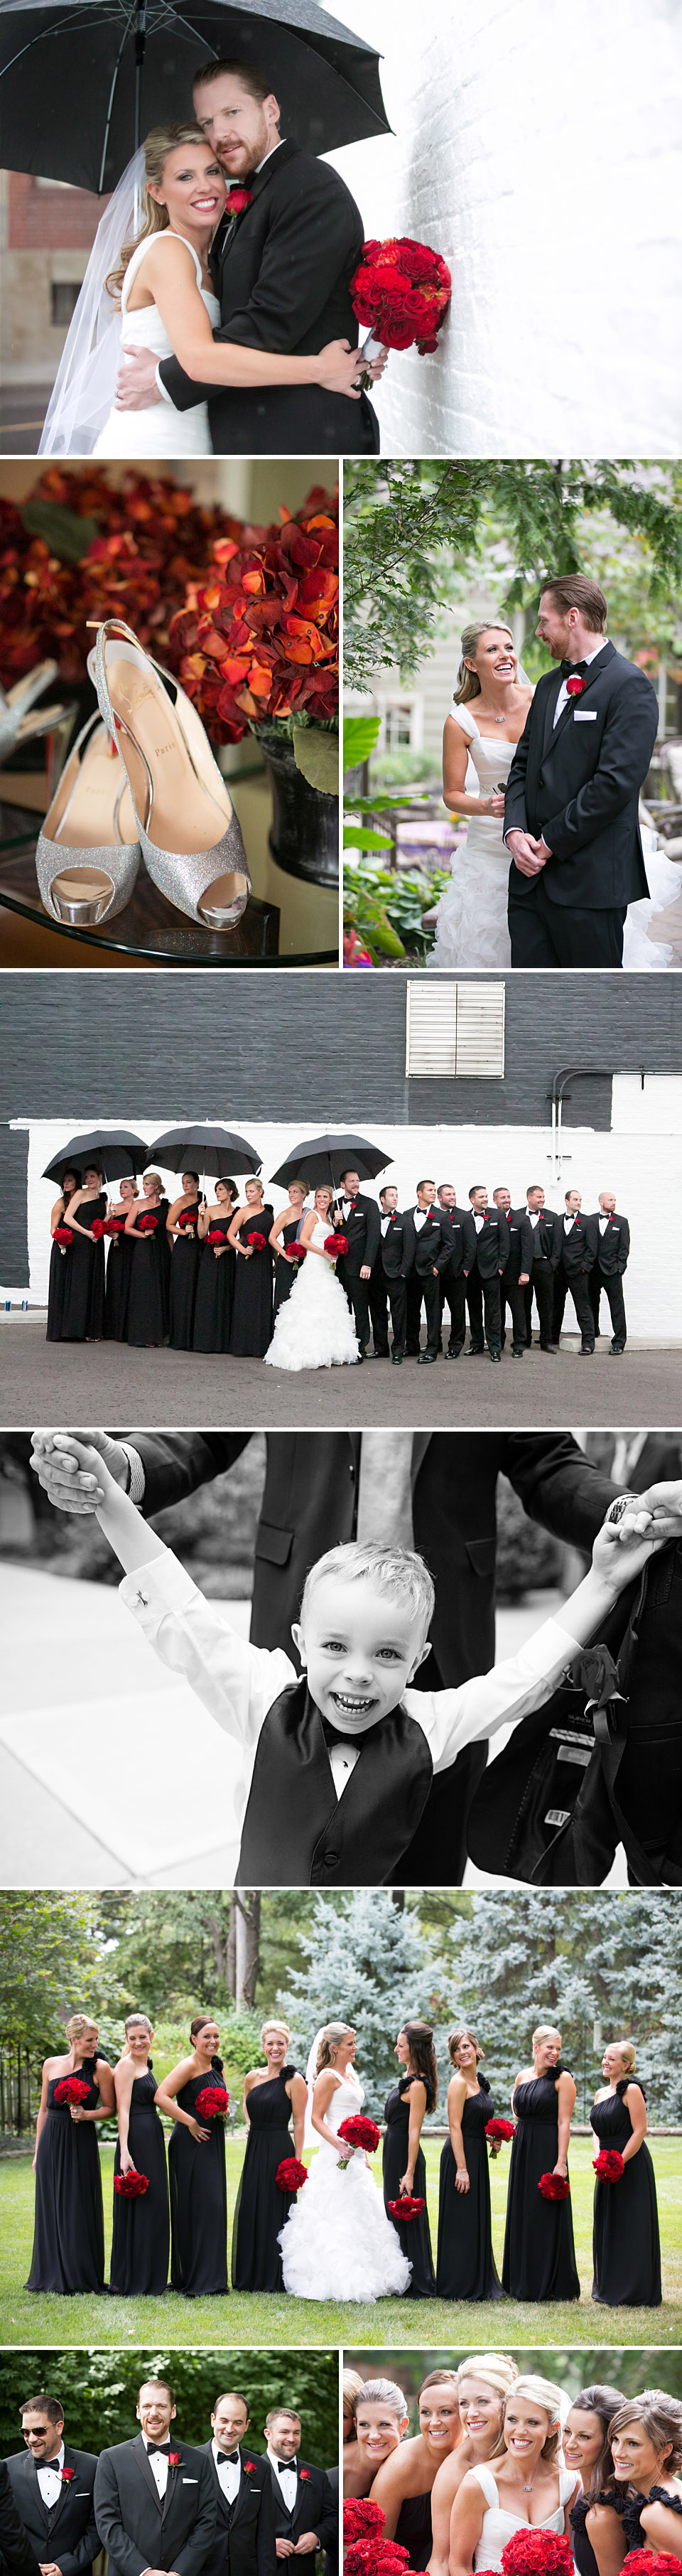 Bridal party pictures, Urban photos, Banana Who Booth, Kansas City wedding photographer, Black and red, modern weddings